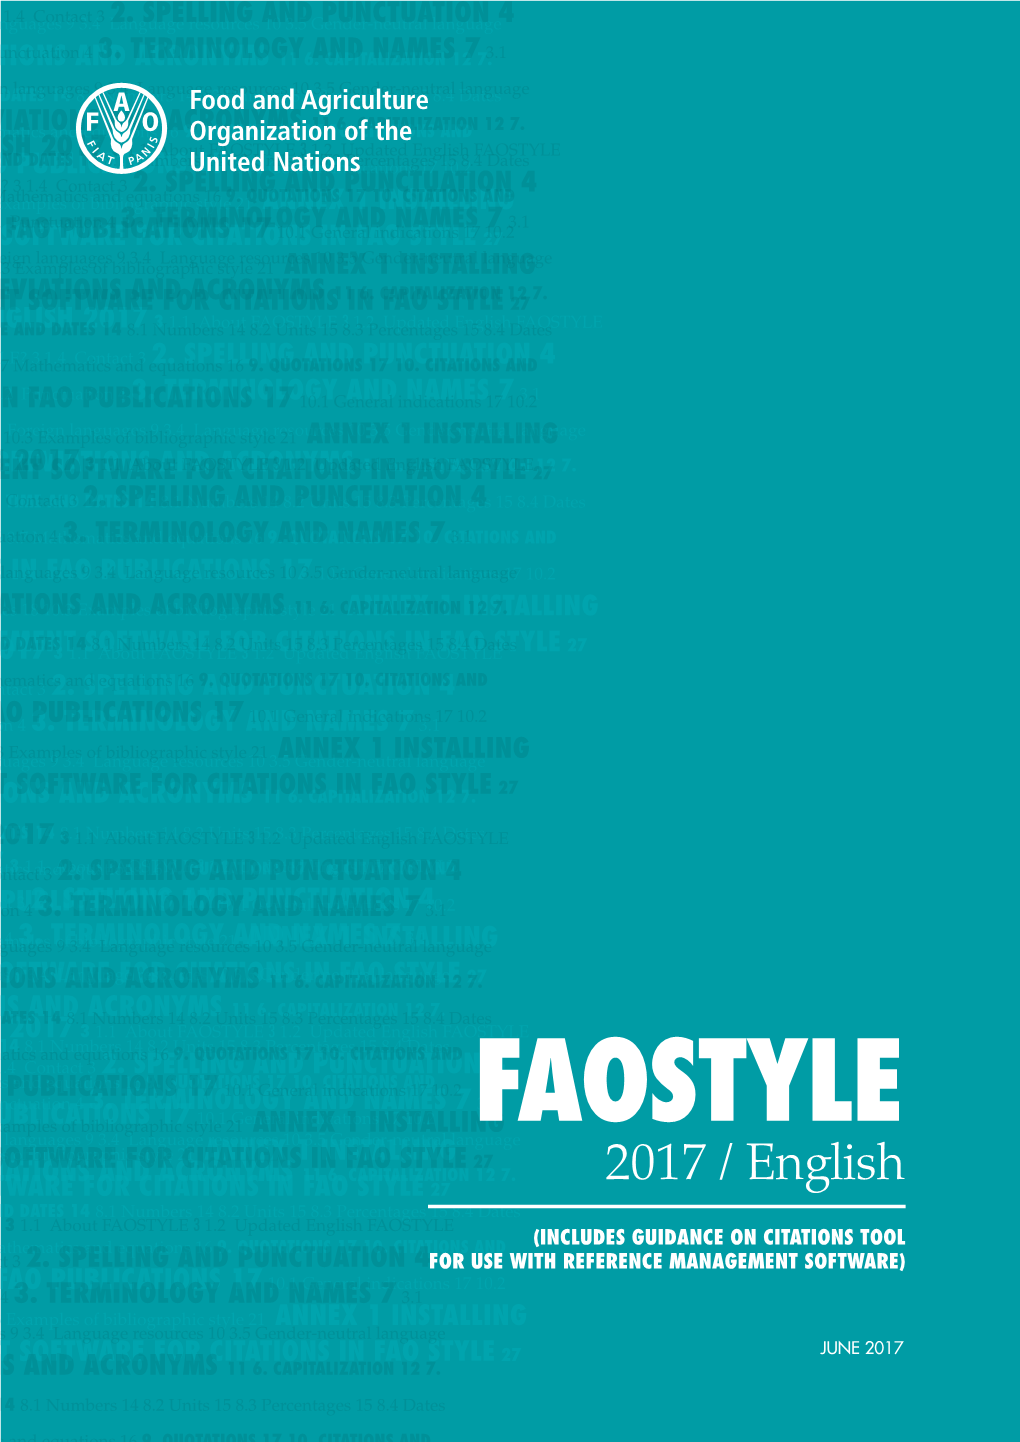 FAOSTYLE for ENGLISH 2017 3 1.1 About FAOSTYLE 3 1.2 Updated English FAOSTYLE 3 1.3 Who Should Use FAOSTYLE? 3 1.4 Contact 3 2